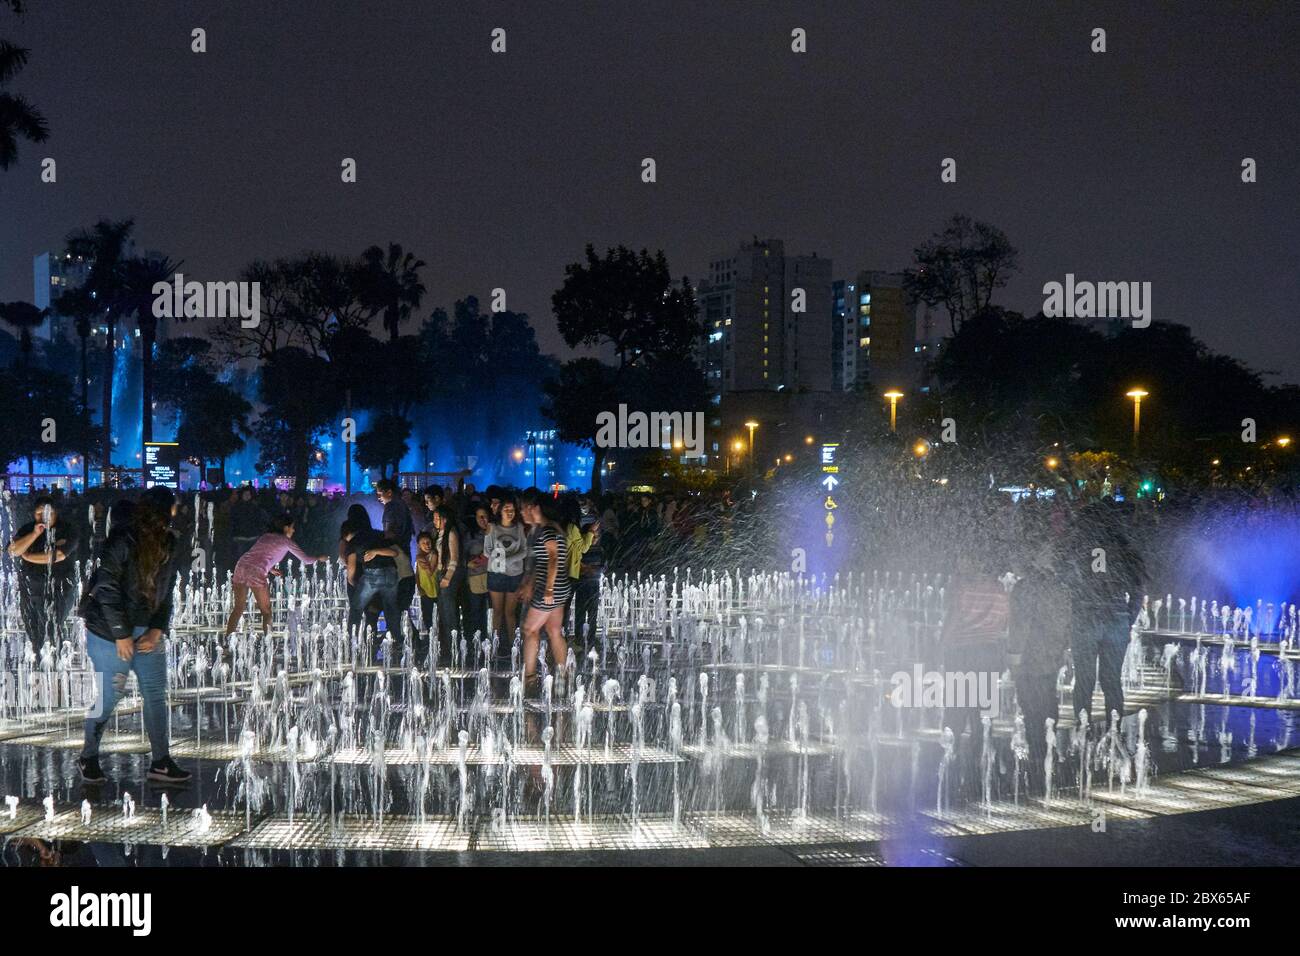 Spectacular of Fountain at Lima Stock Photo - Alamy